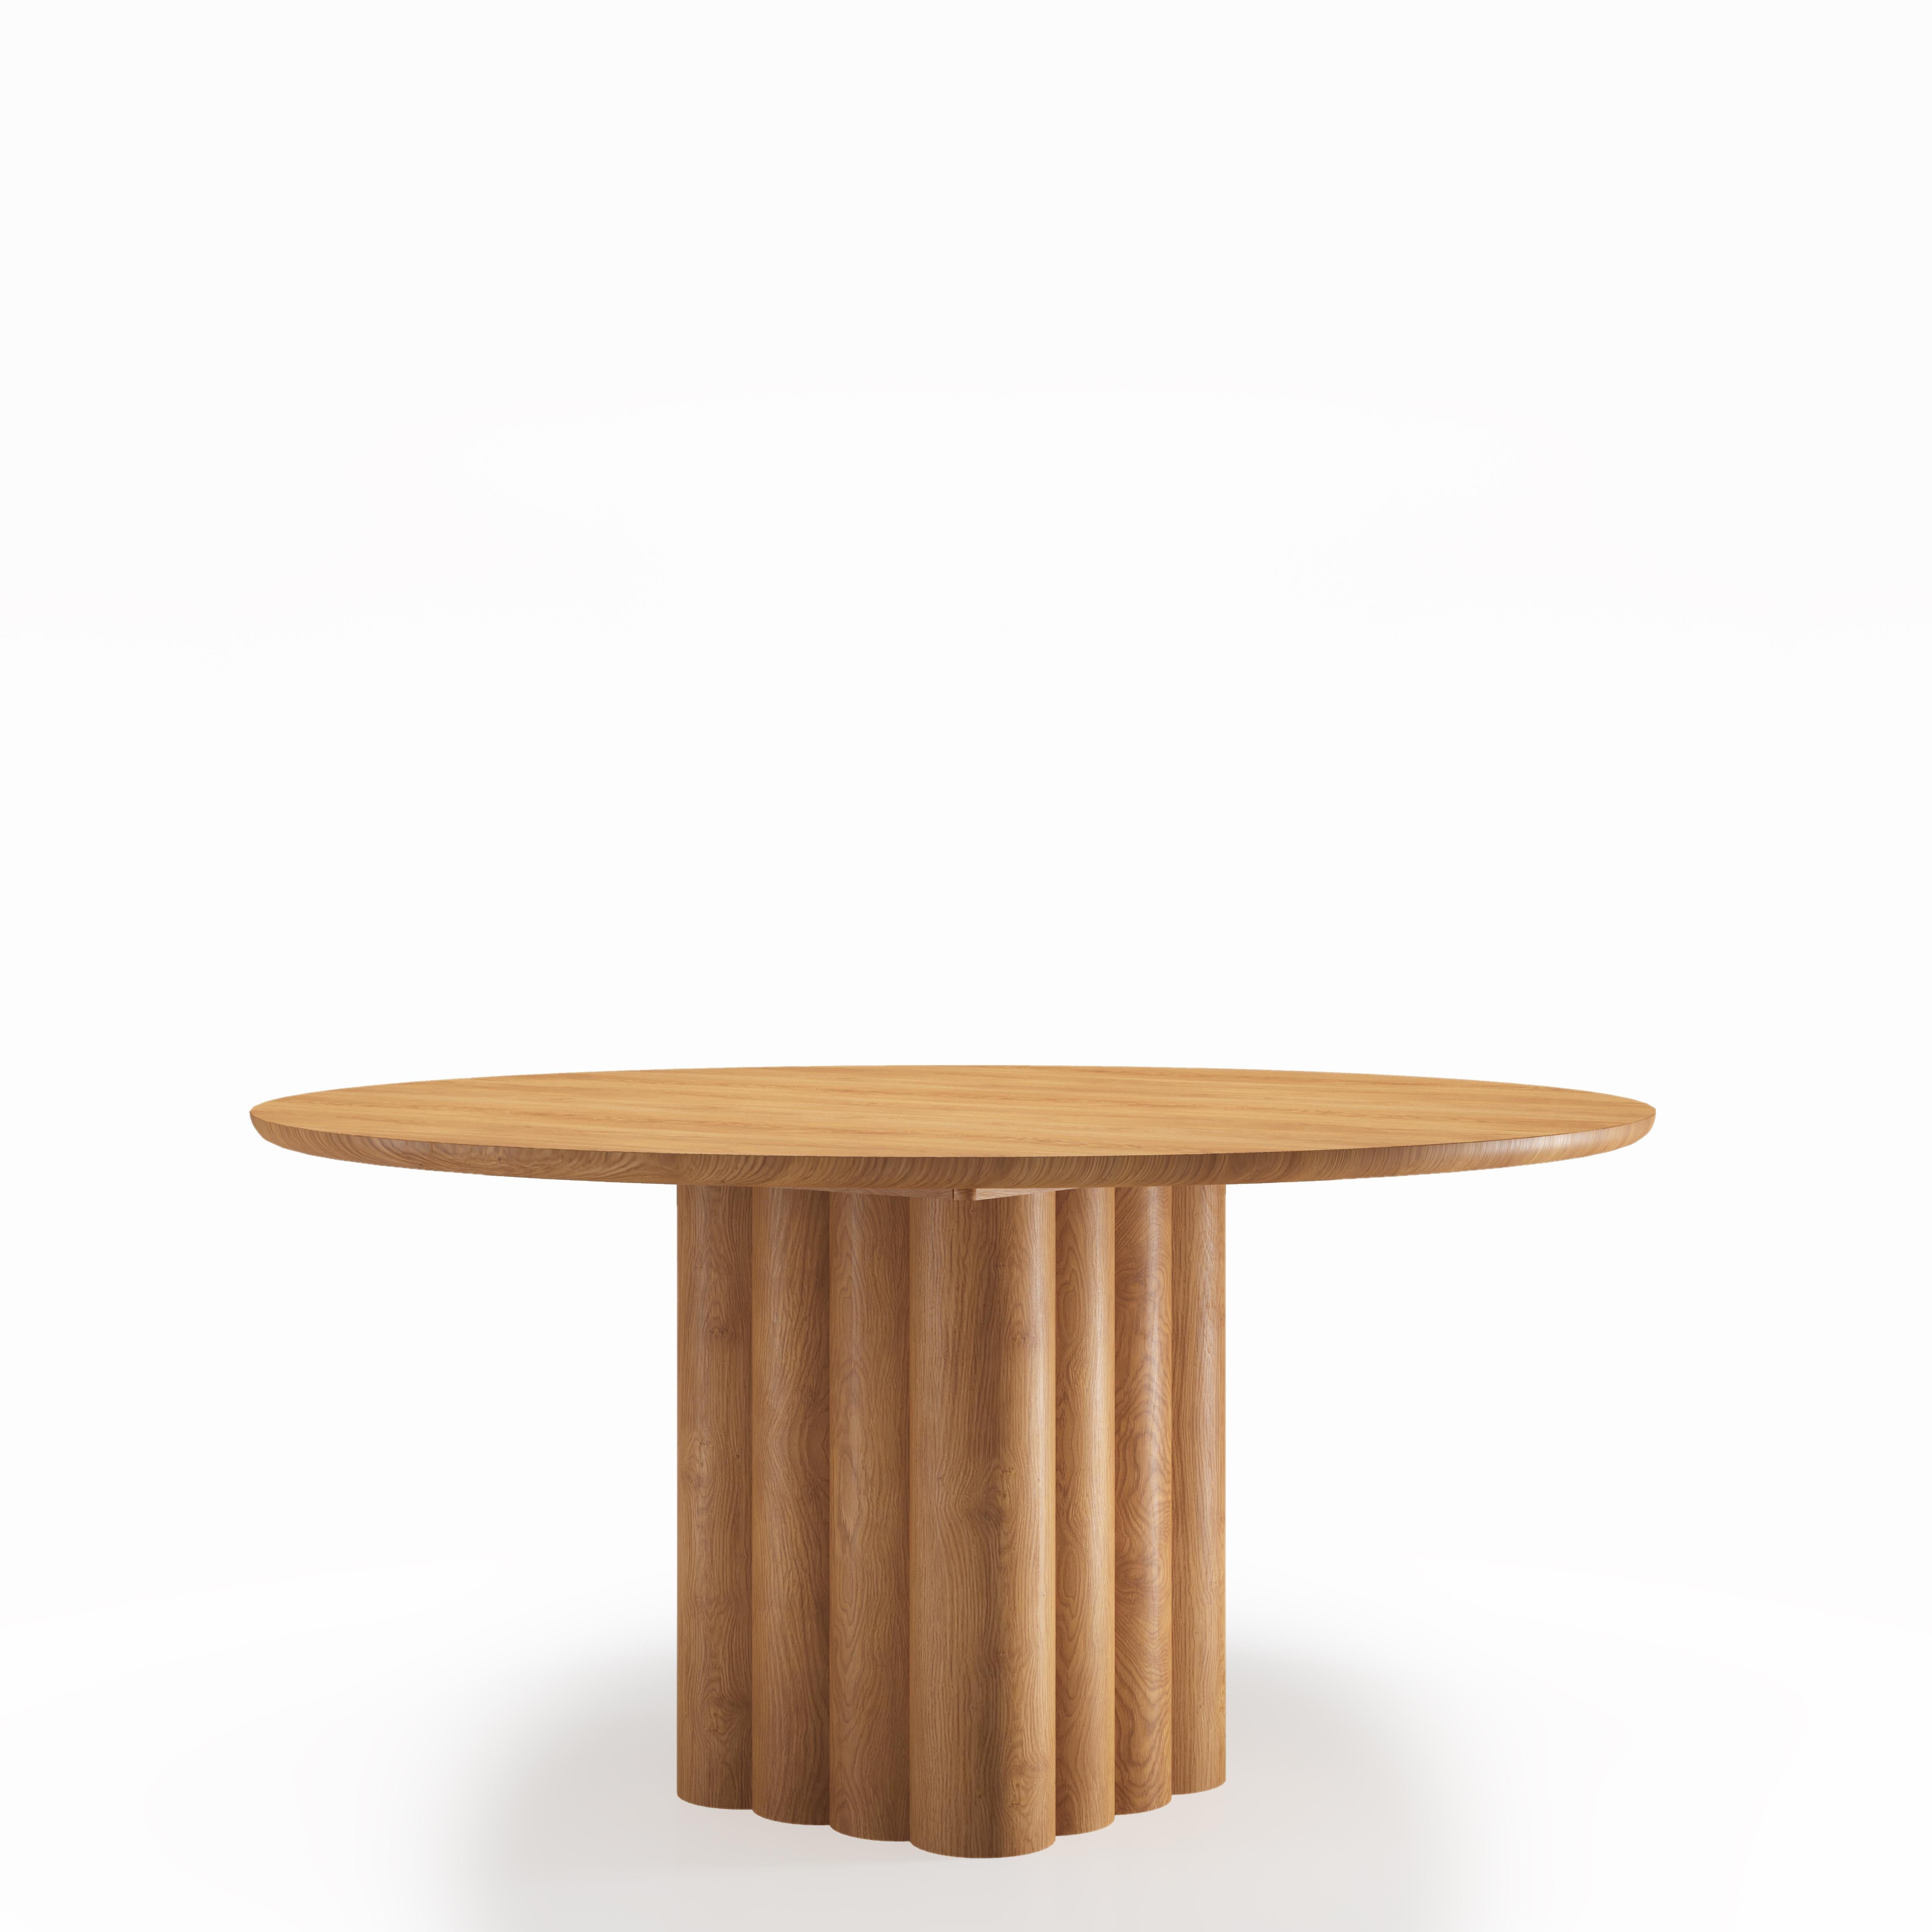 Round Dining Table 'Plush' by Dk3, Smoked Oak or Walnut, 140 cm For Sale 6